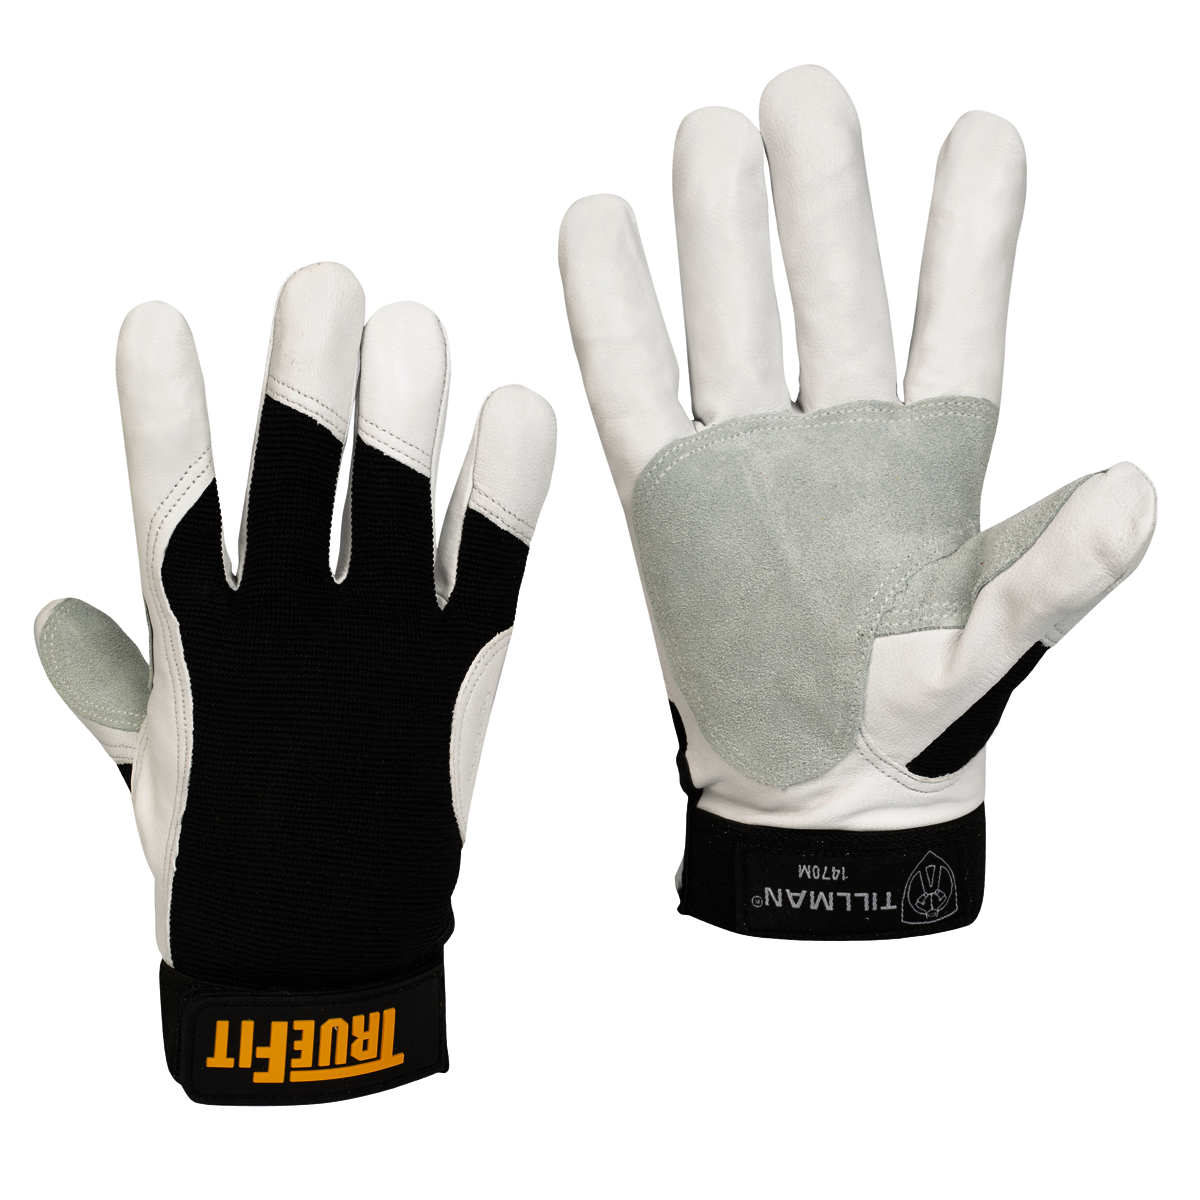 2 Pairs Radnor Medium 12 1/2 Navy Blue and White Heavy Weight Grain Cowhide Fleece Lined MIG Welders Gloves with Reinforced Palm and Thumb and 4 Cuff